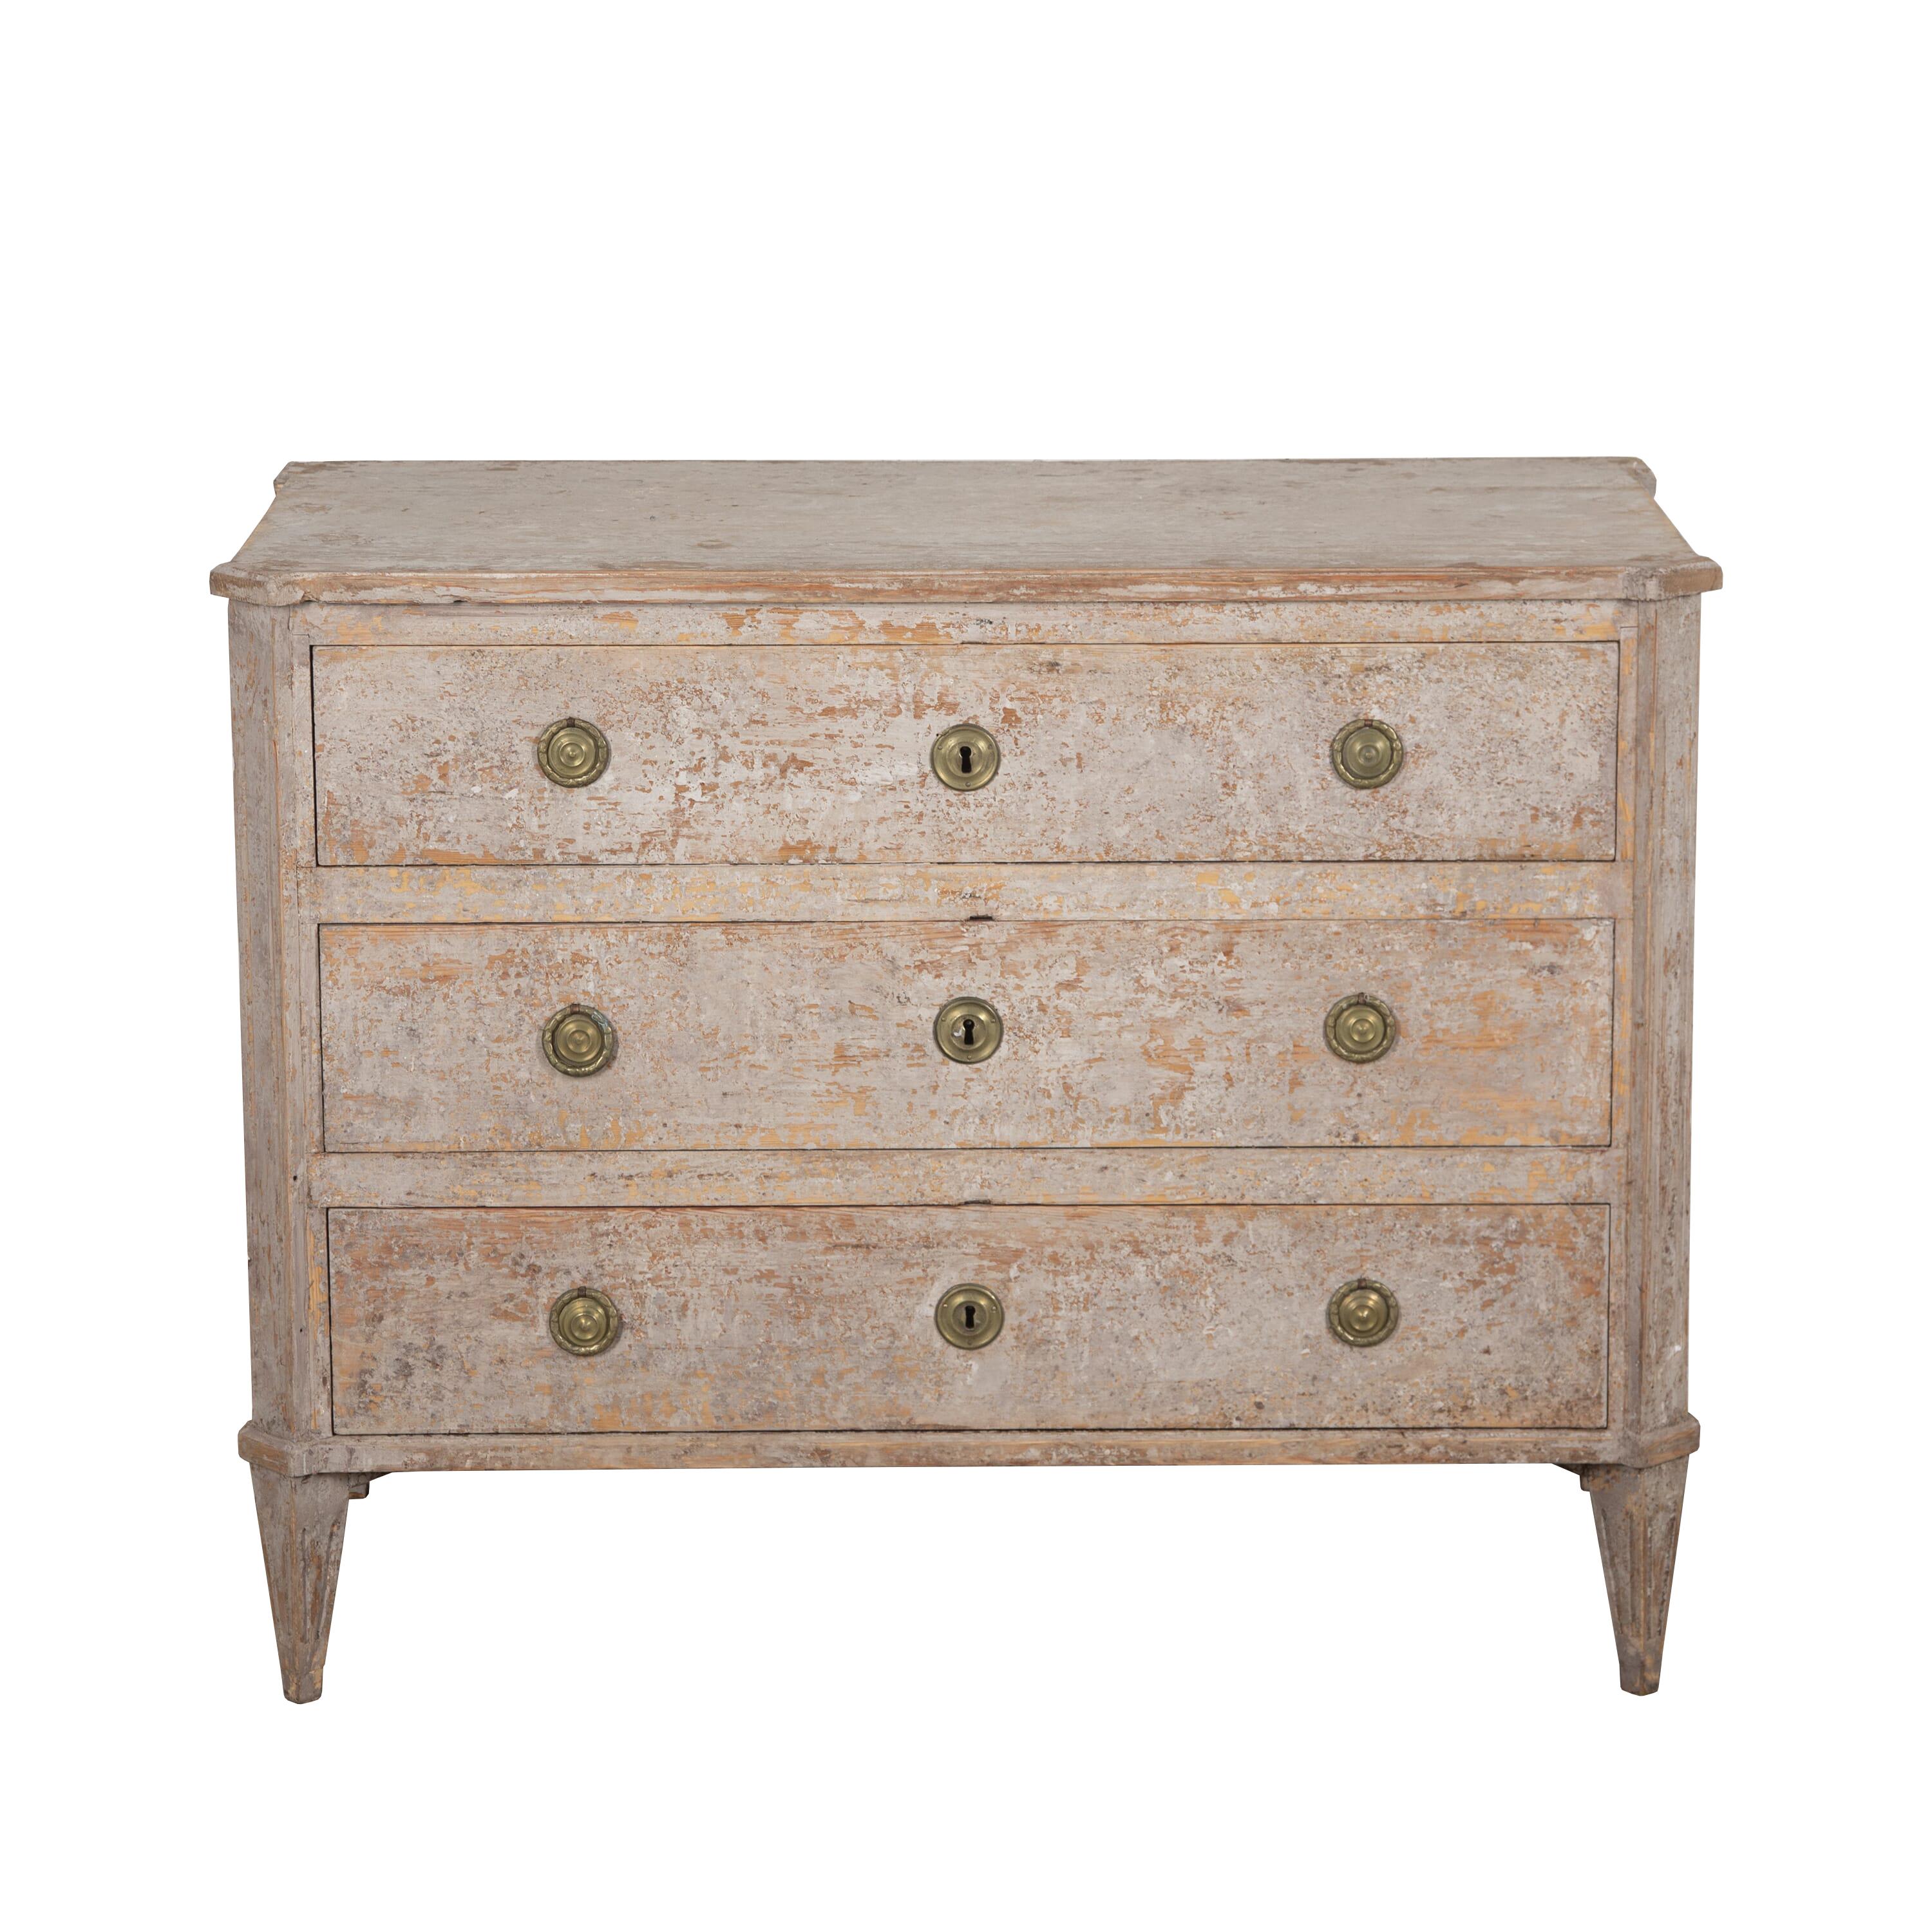 Early 19th Century Gustavian Commode 2